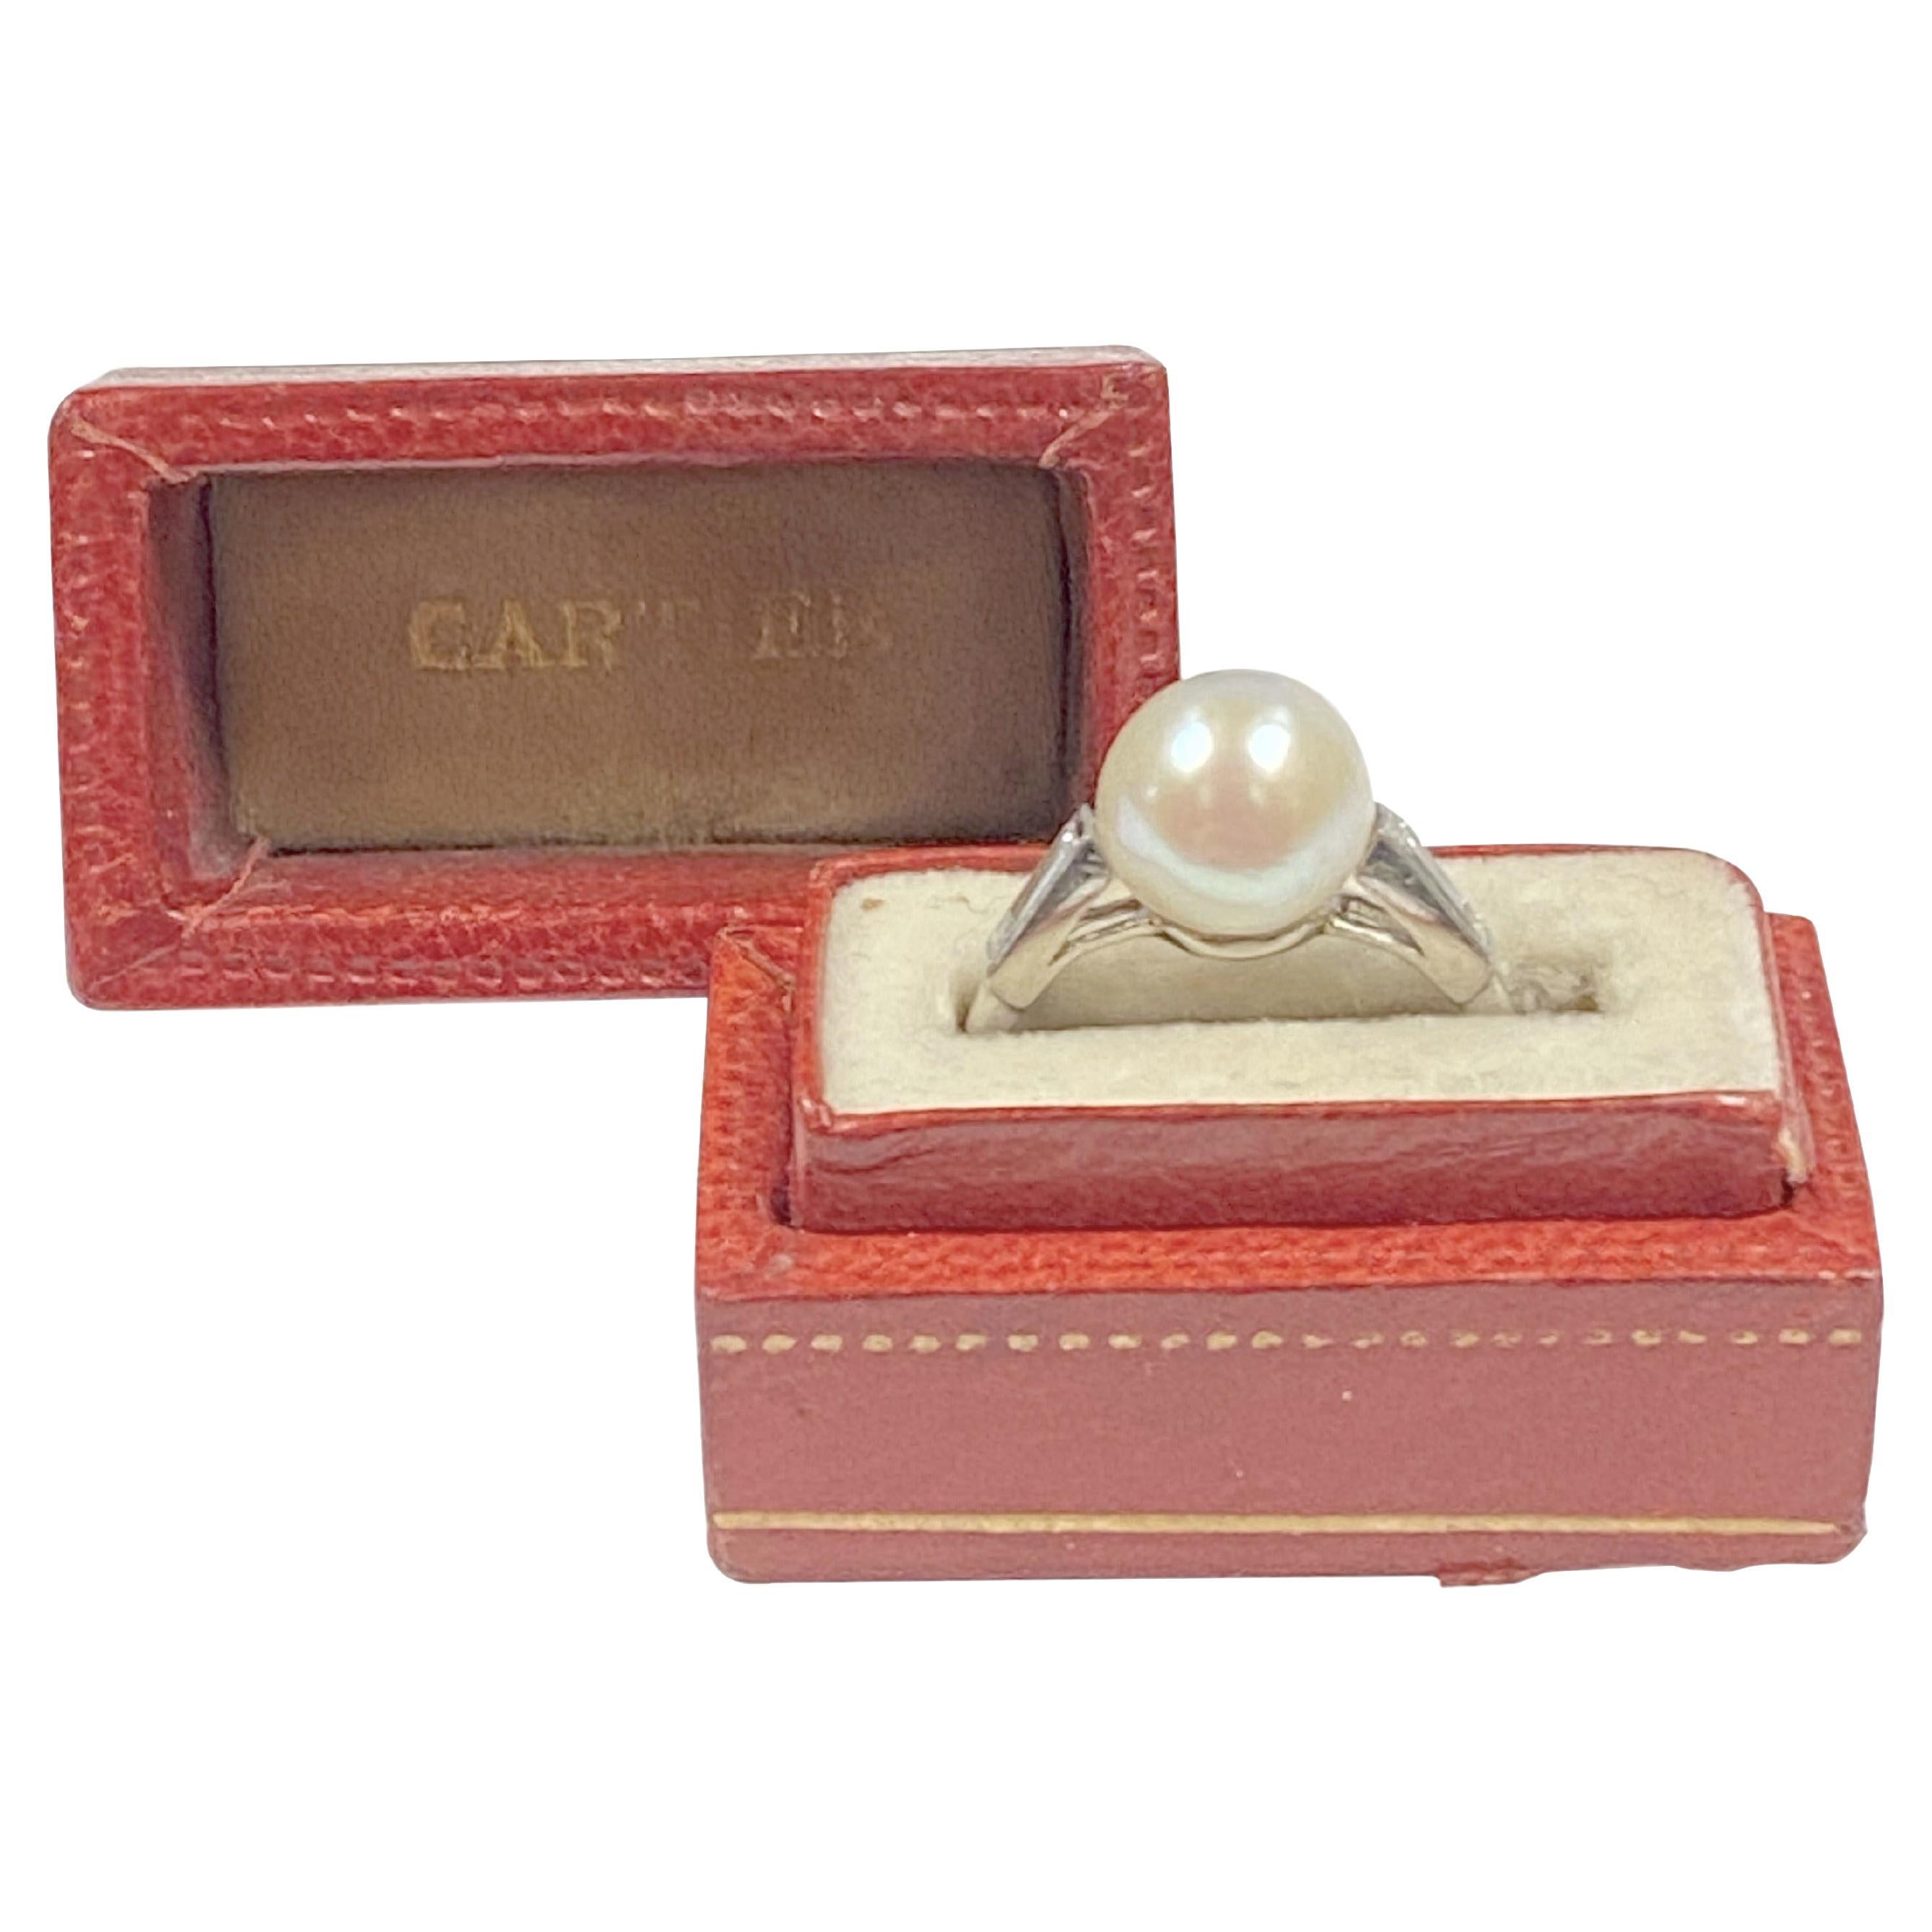 What does a white pearl ring symbolize?